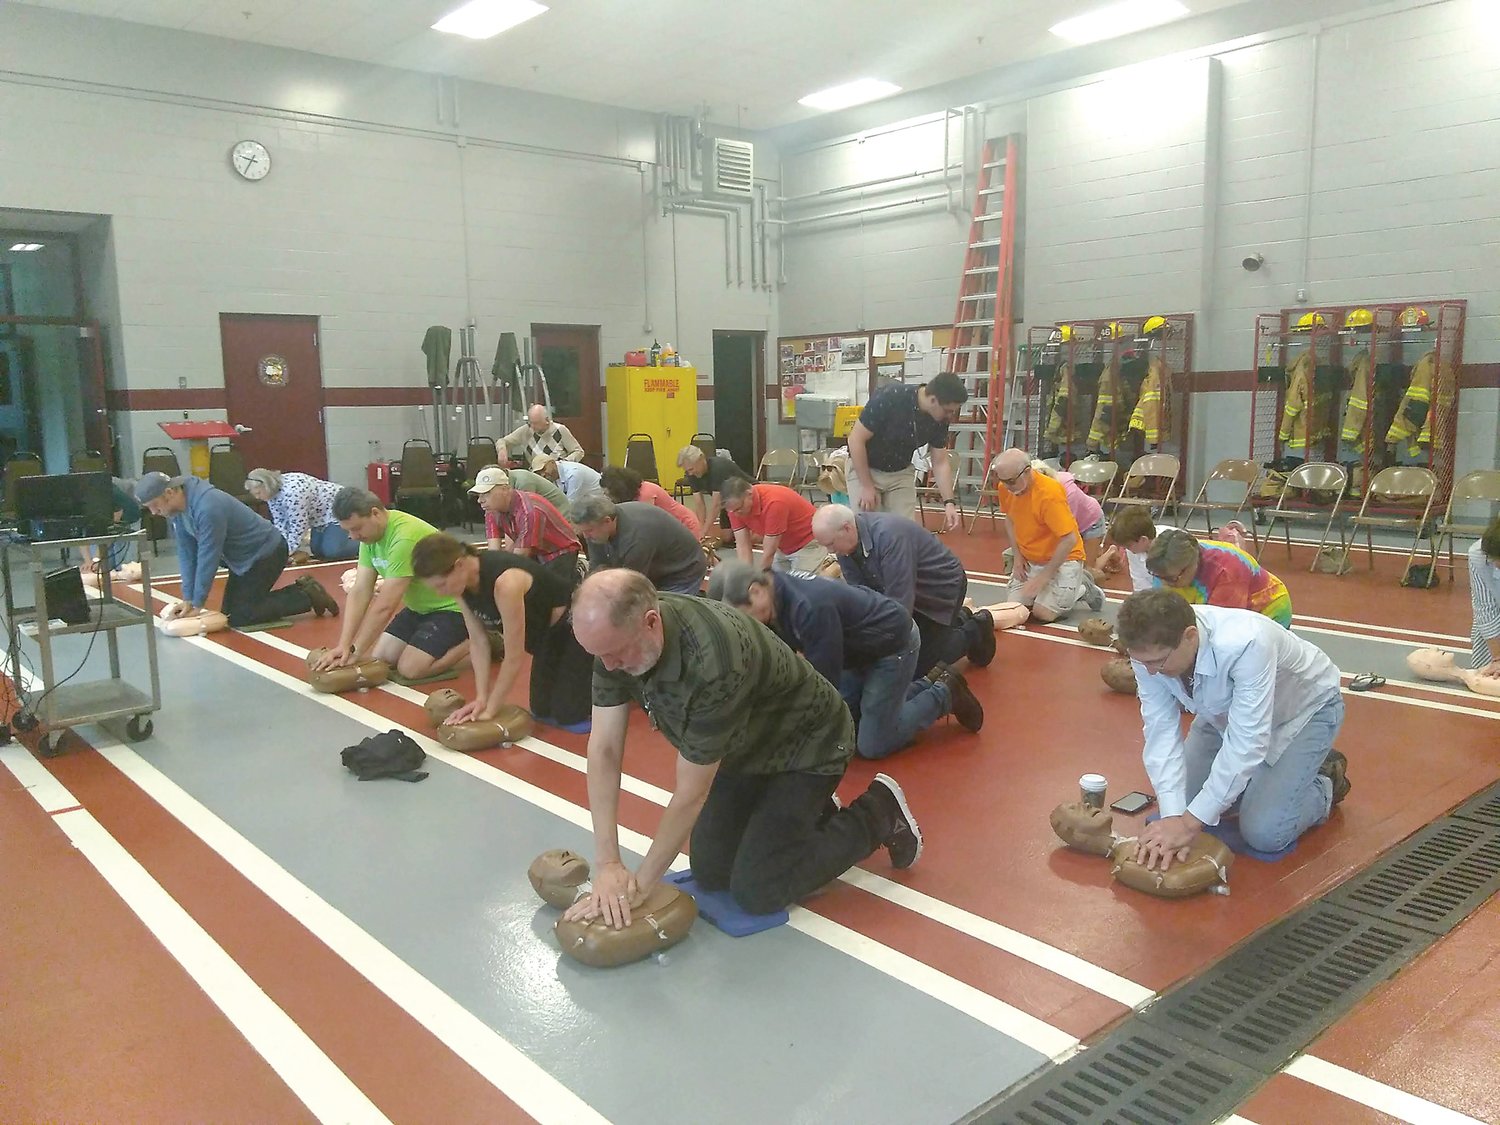 CPR classes will be offered free of charge to community members June 5 and 9 at the New Hope Eagle Fire Company.